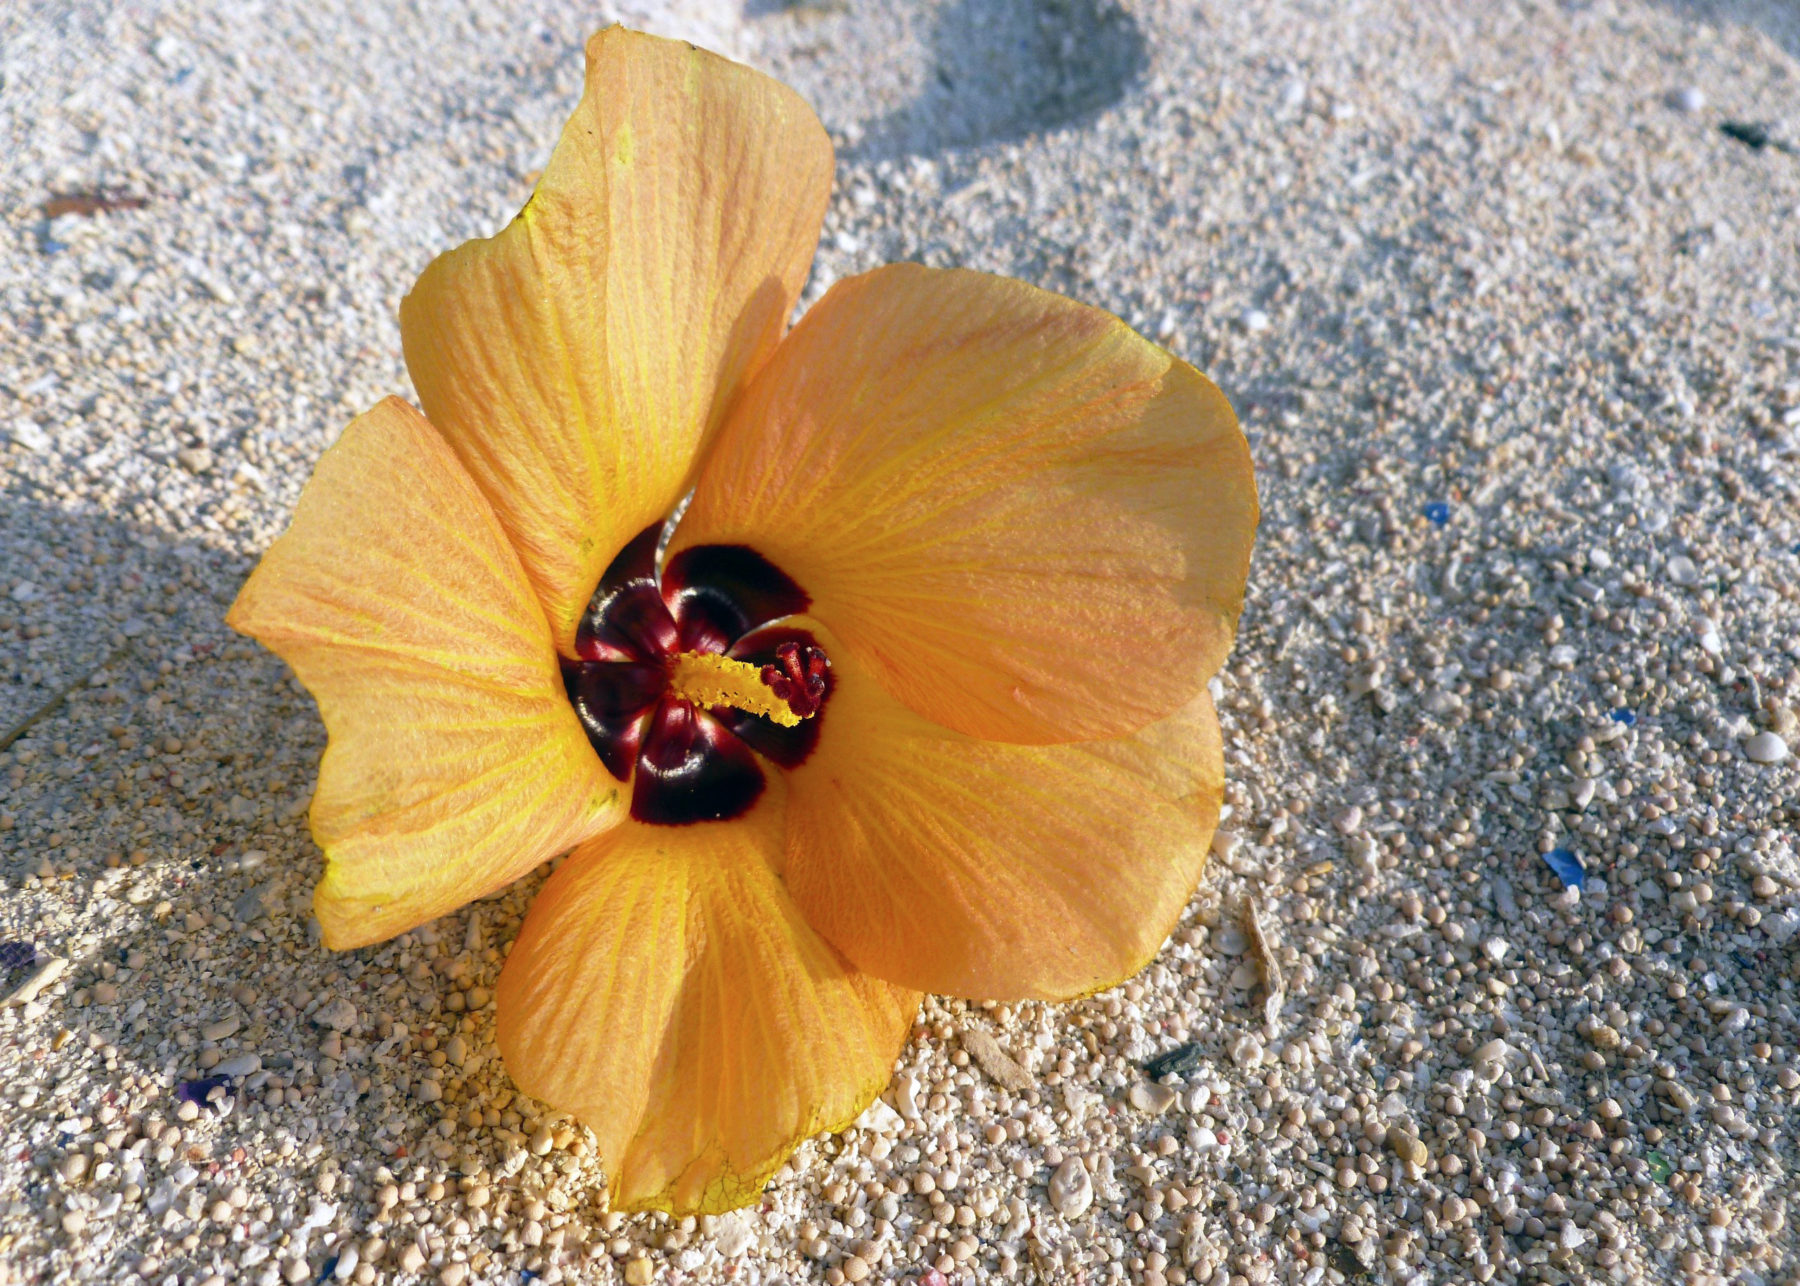 A tropical flower lays in the sand